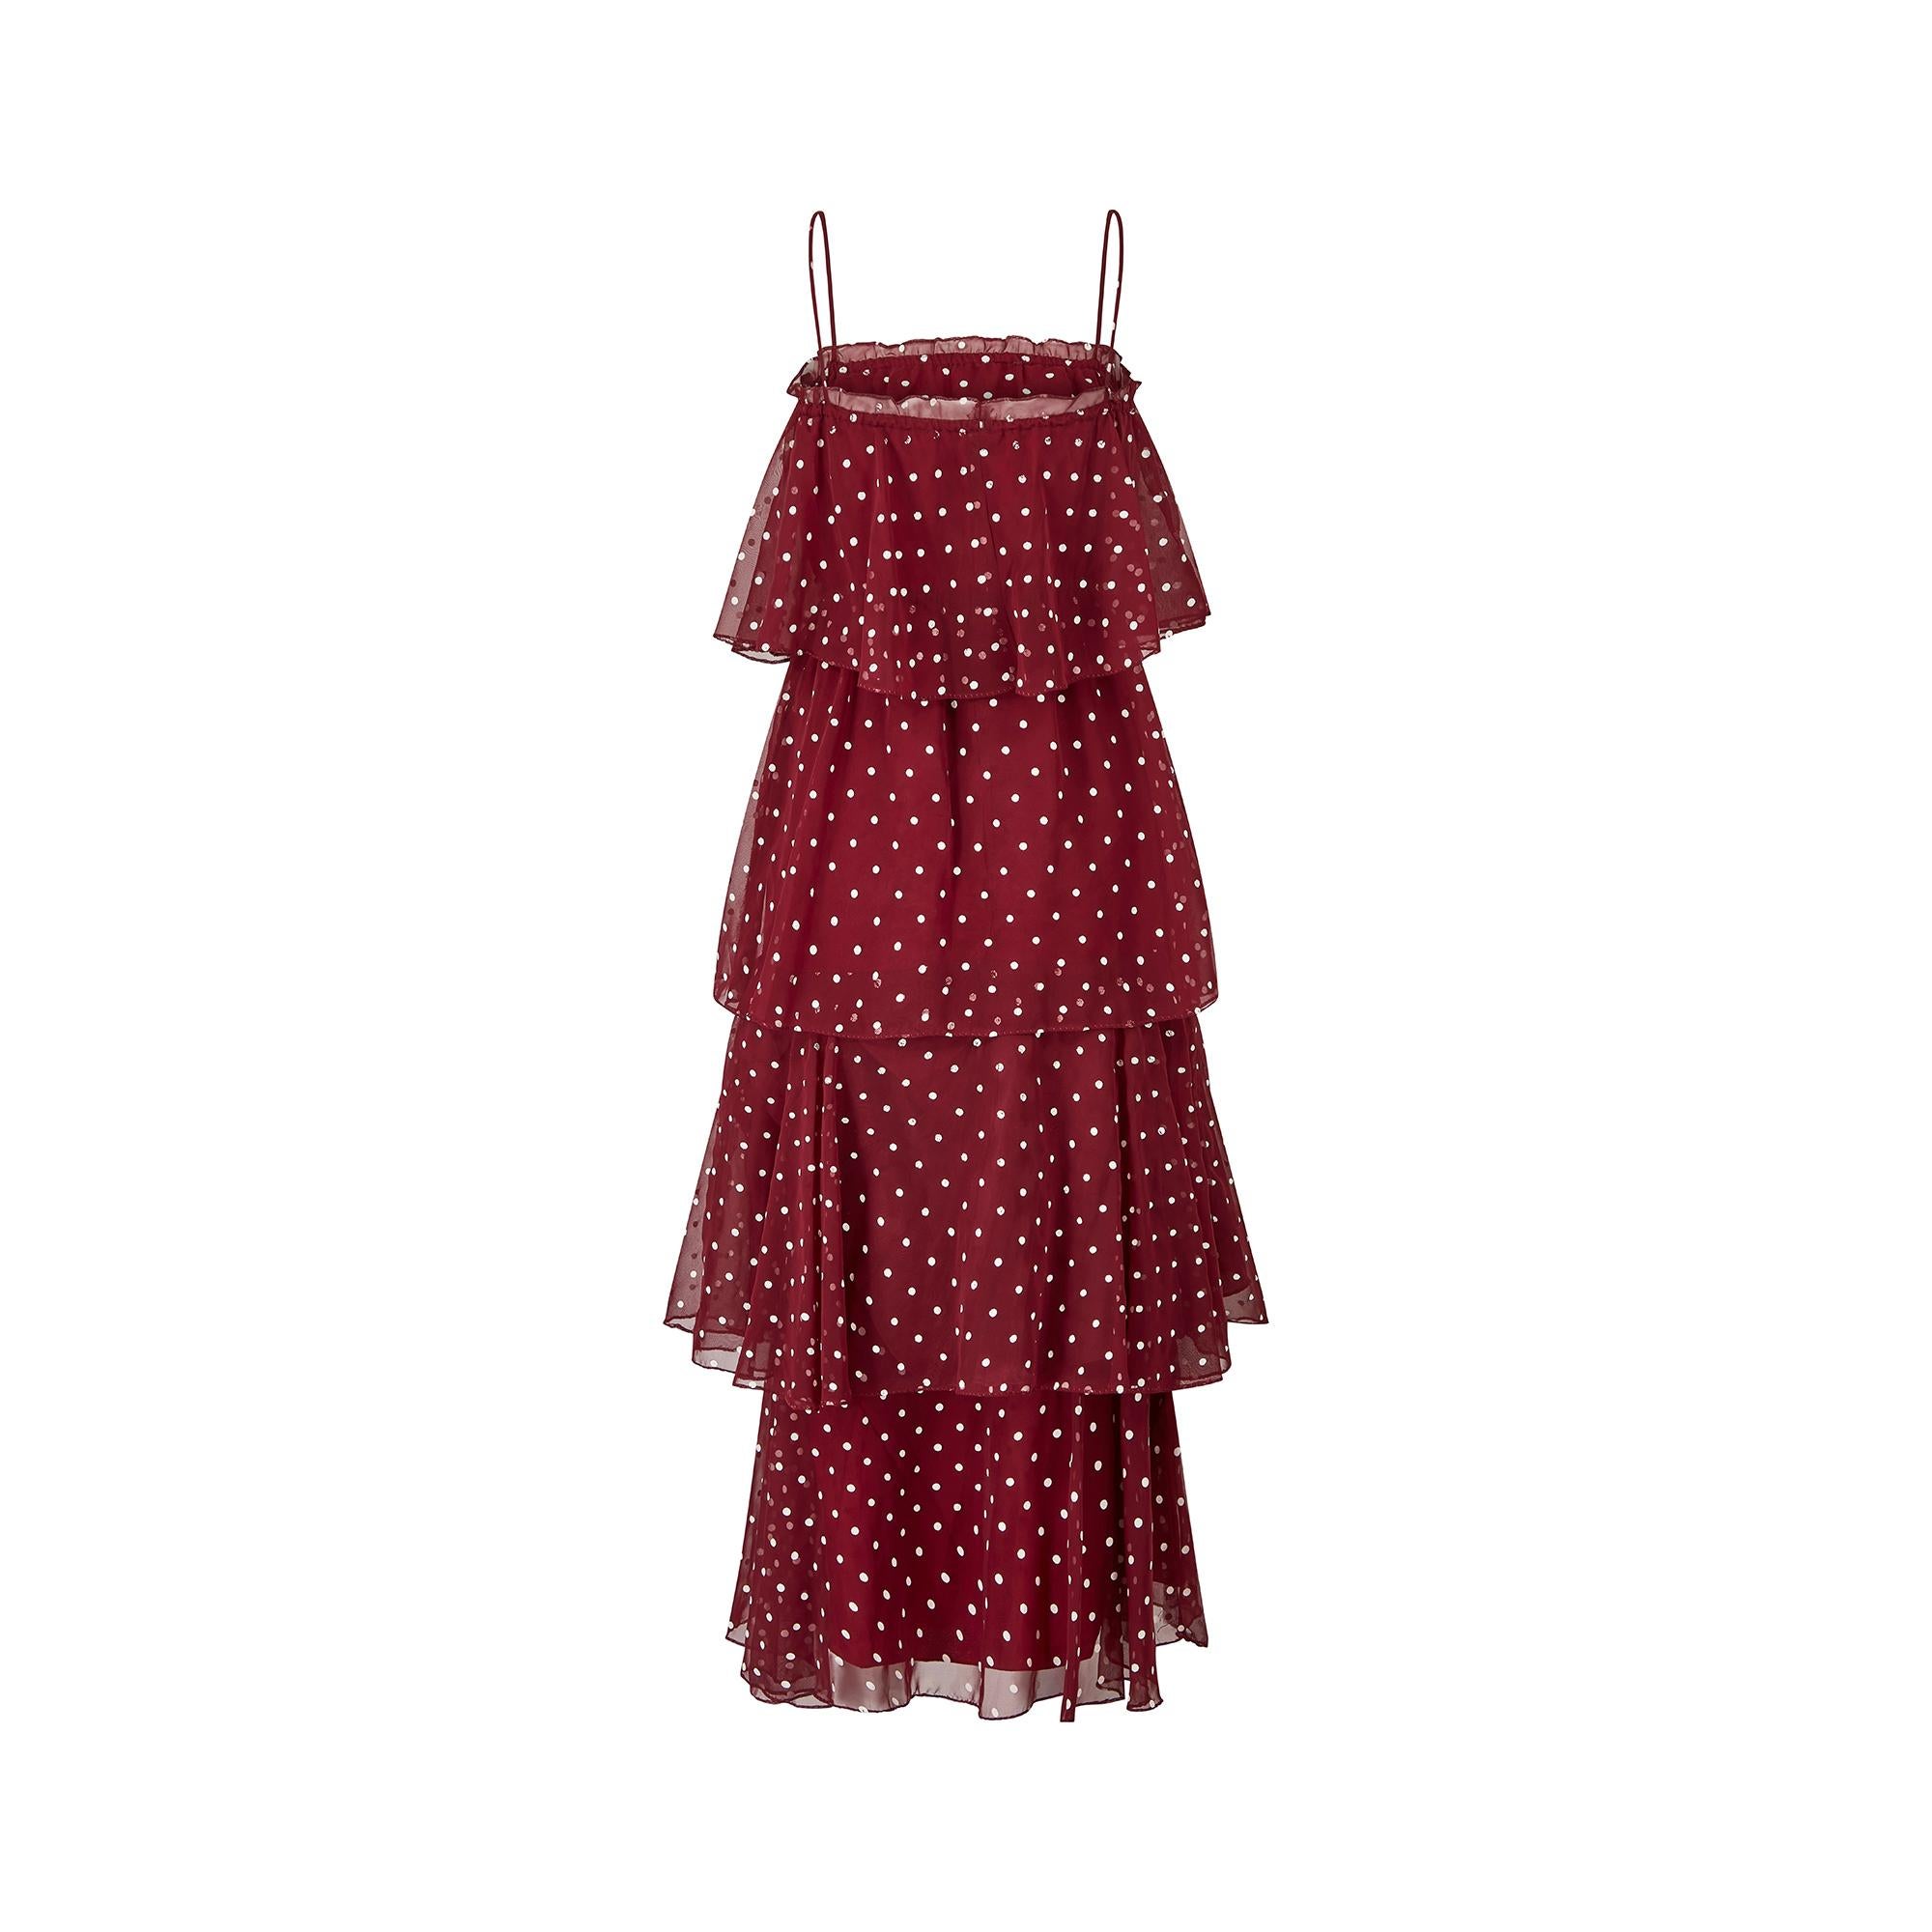 1970s Norman Berg Burgundy and White Polka Dot Tiered Dress In Excellent Condition For Sale In London, GB